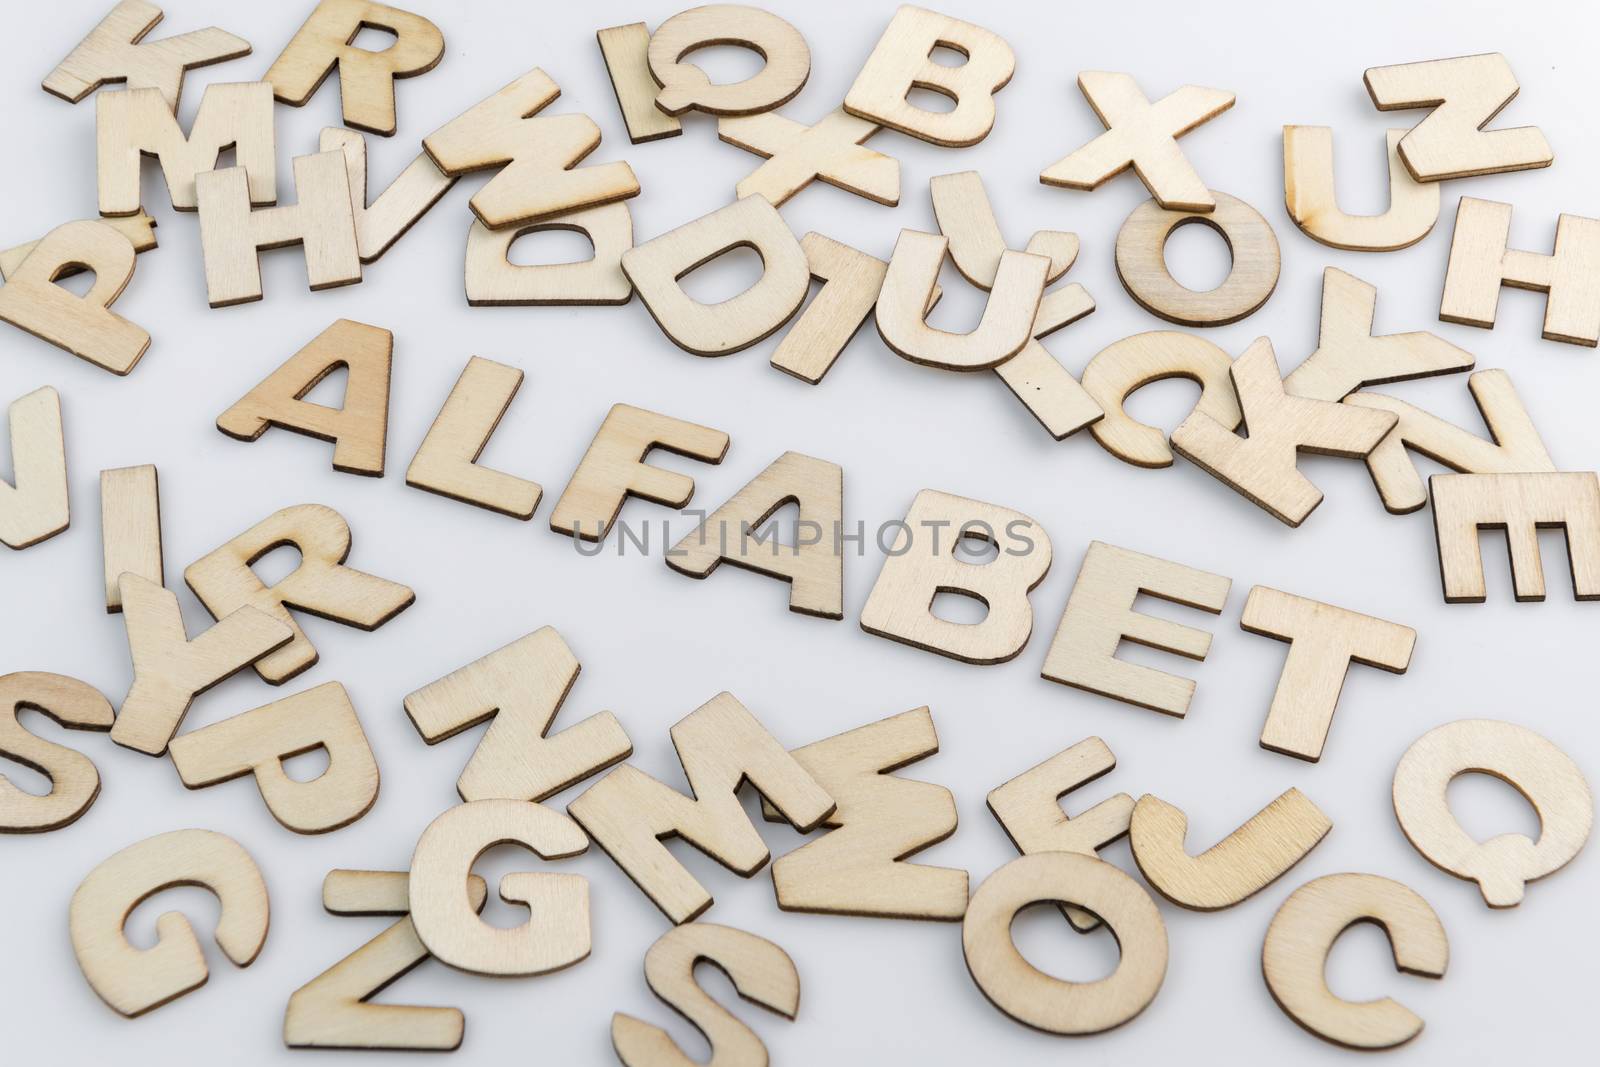 The word alphabet in Dutch translation in wooden letters
 by Tofotografie